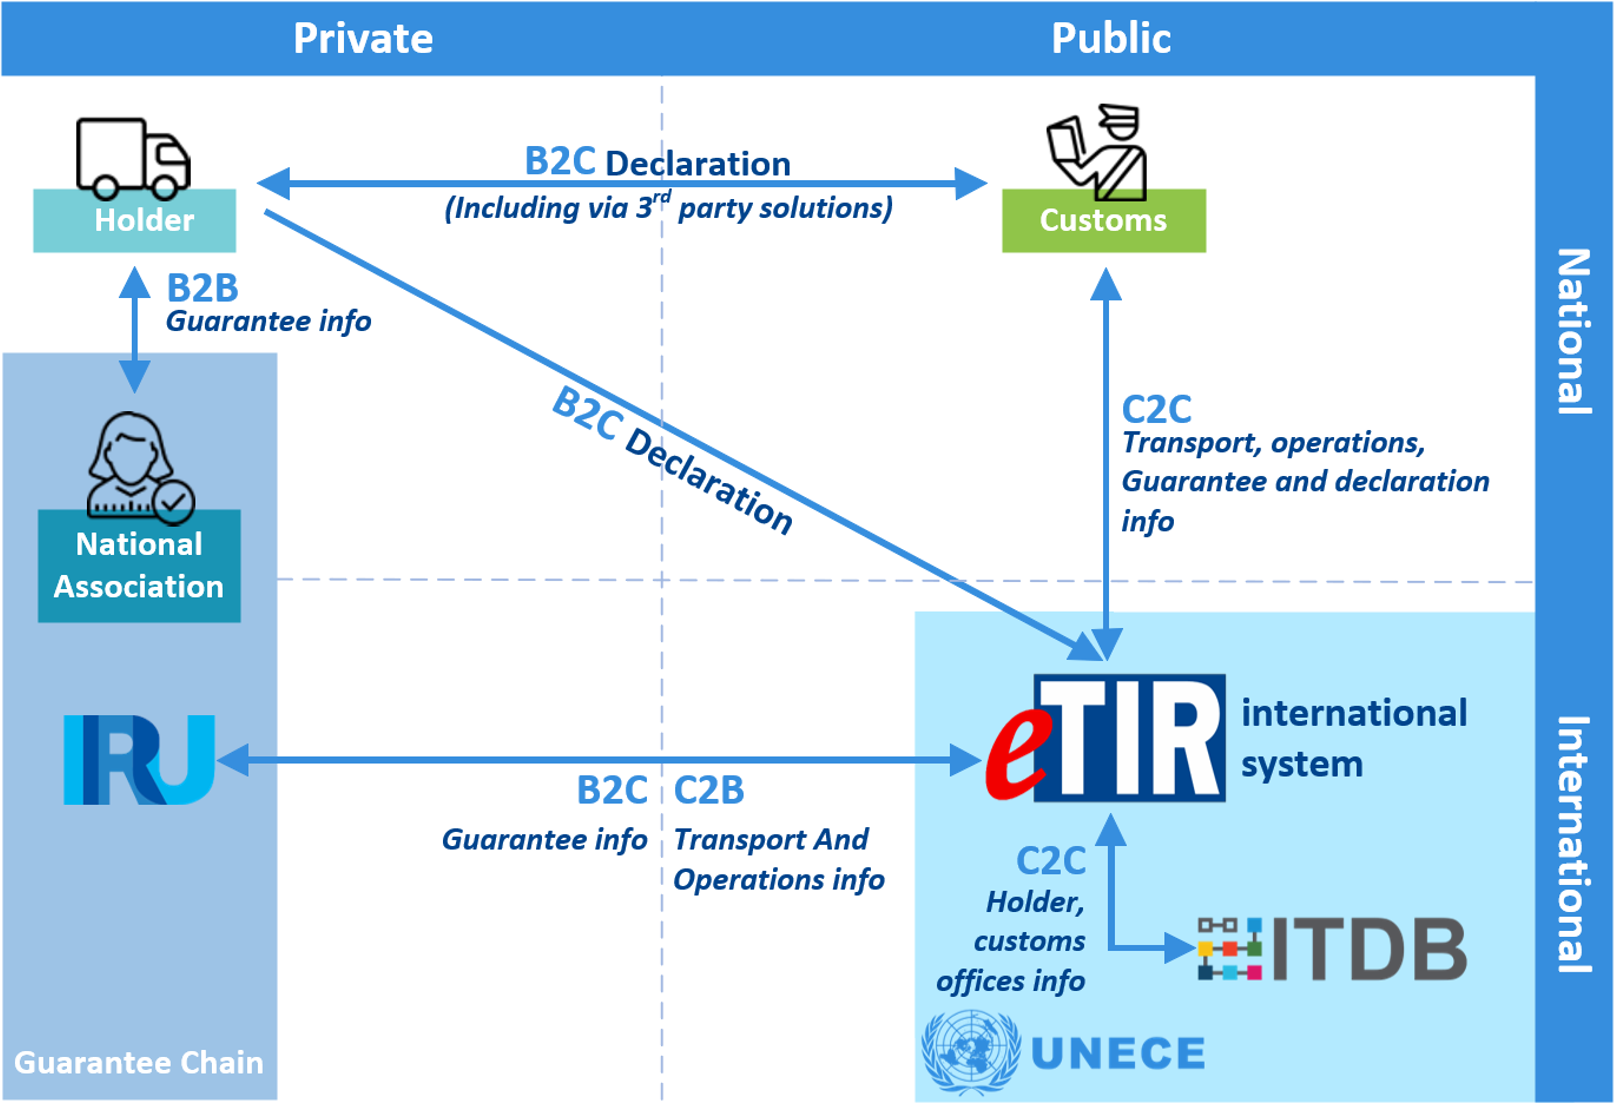  the interactions between the main actors of the TIR Convention in the context of the eTIR procedure